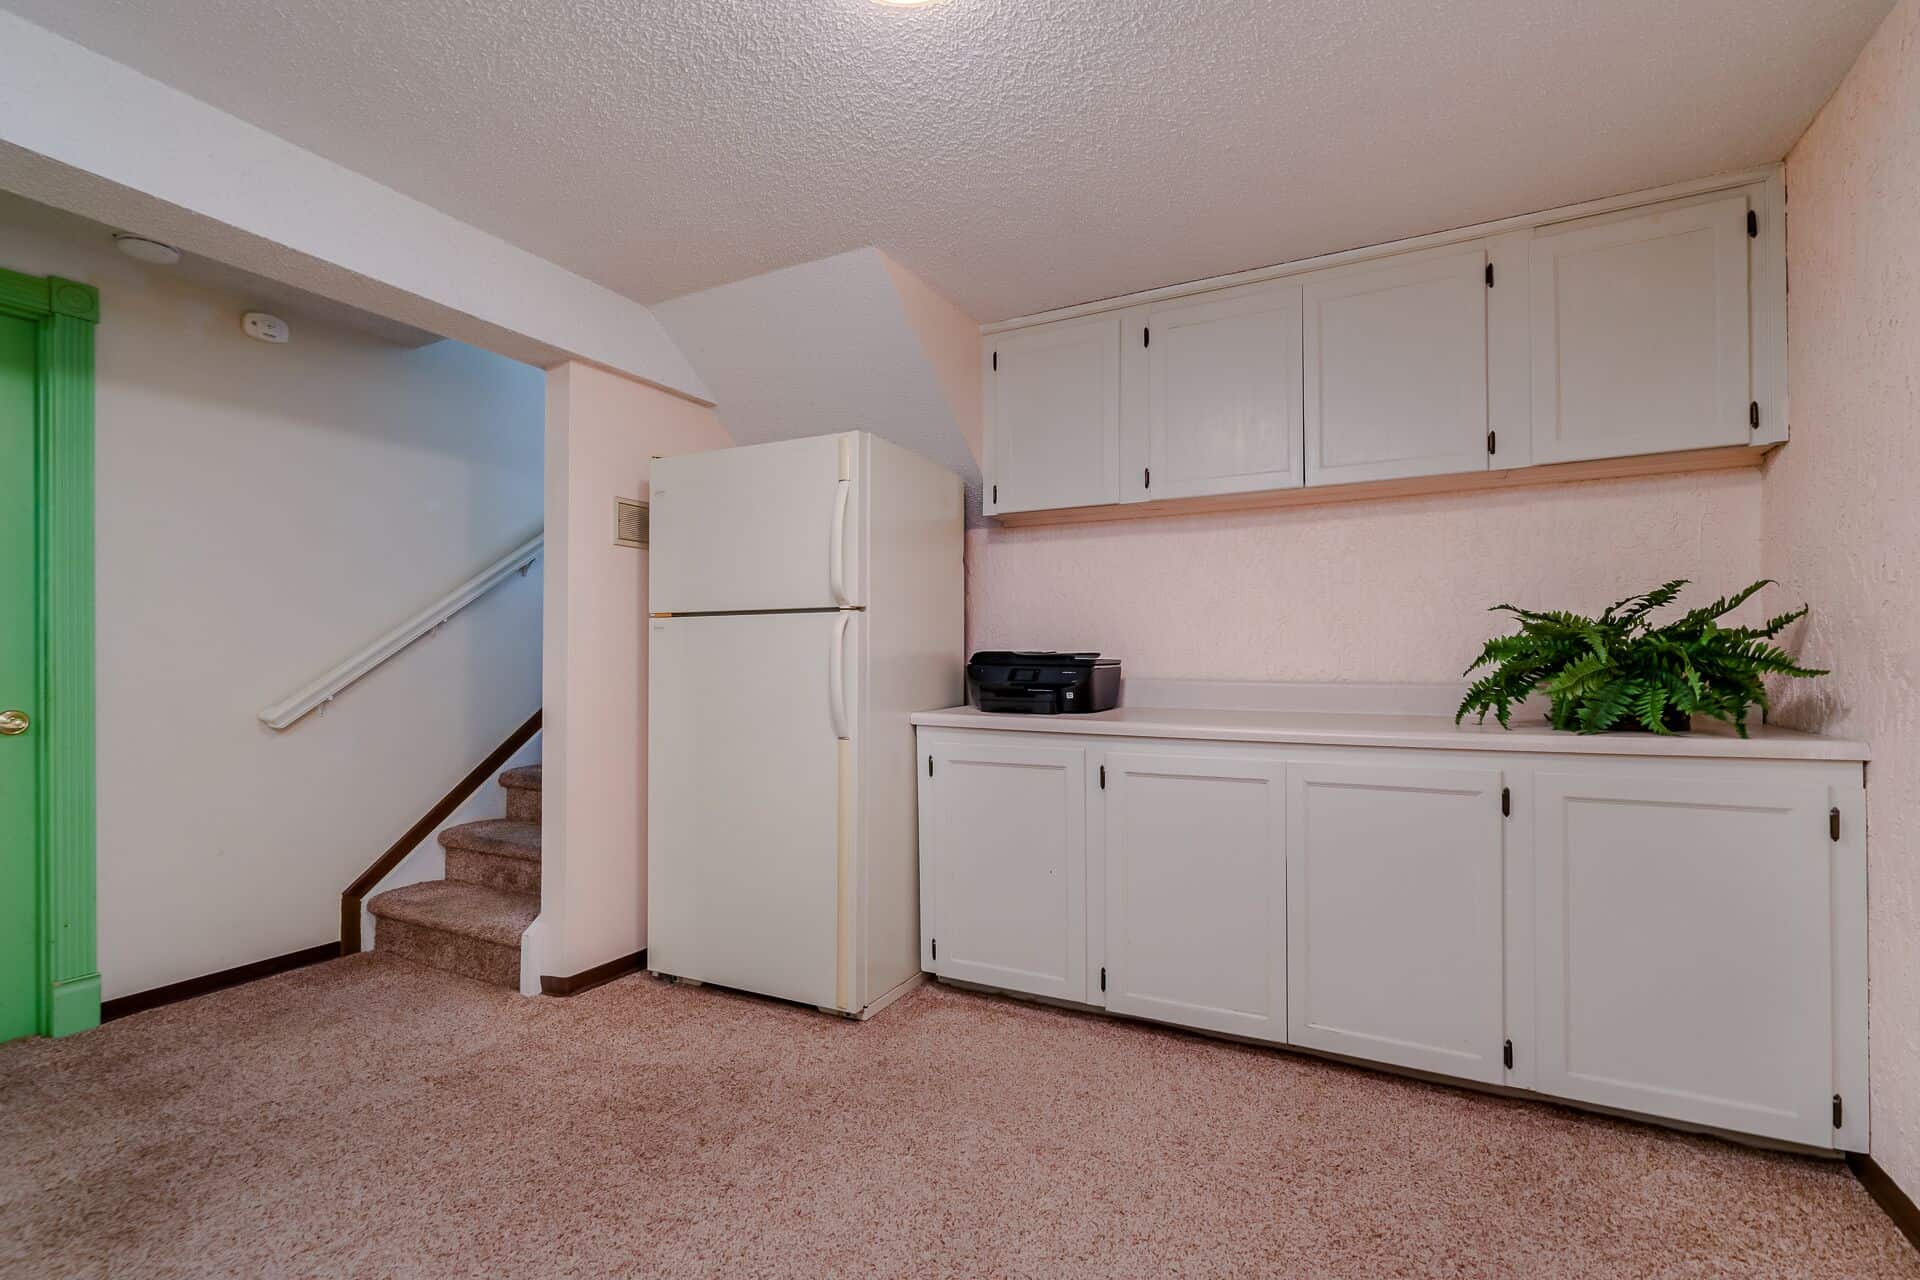 Basement Family Room with Built-In Cabinets and Refrigerator